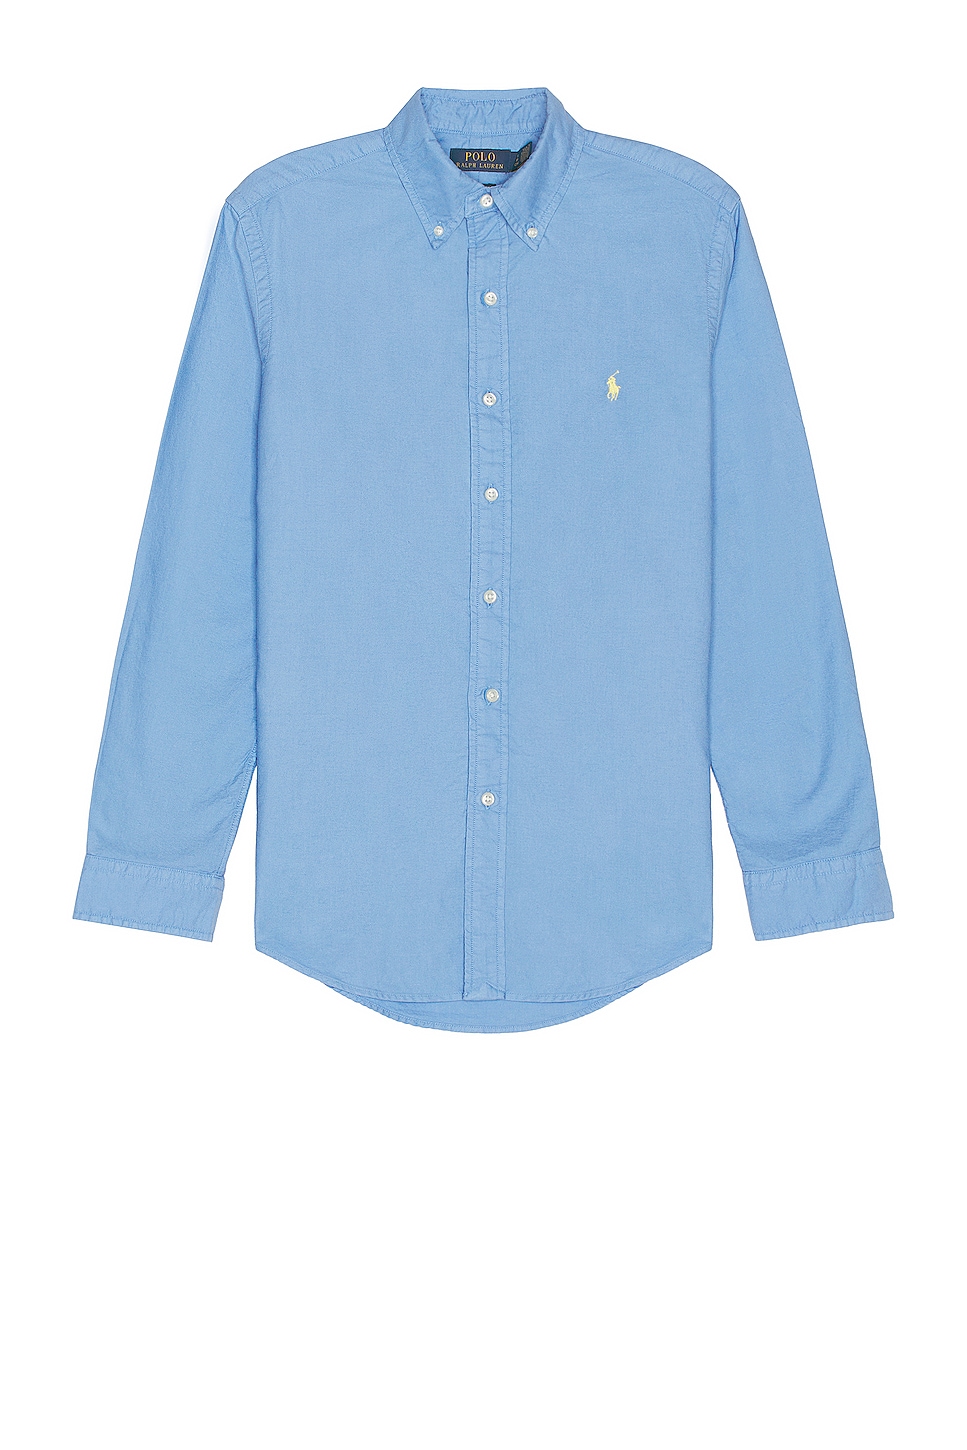 Image 1 of Polo Ralph Lauren Oxford Long Sleeve Shirt in Harbor Island Blue